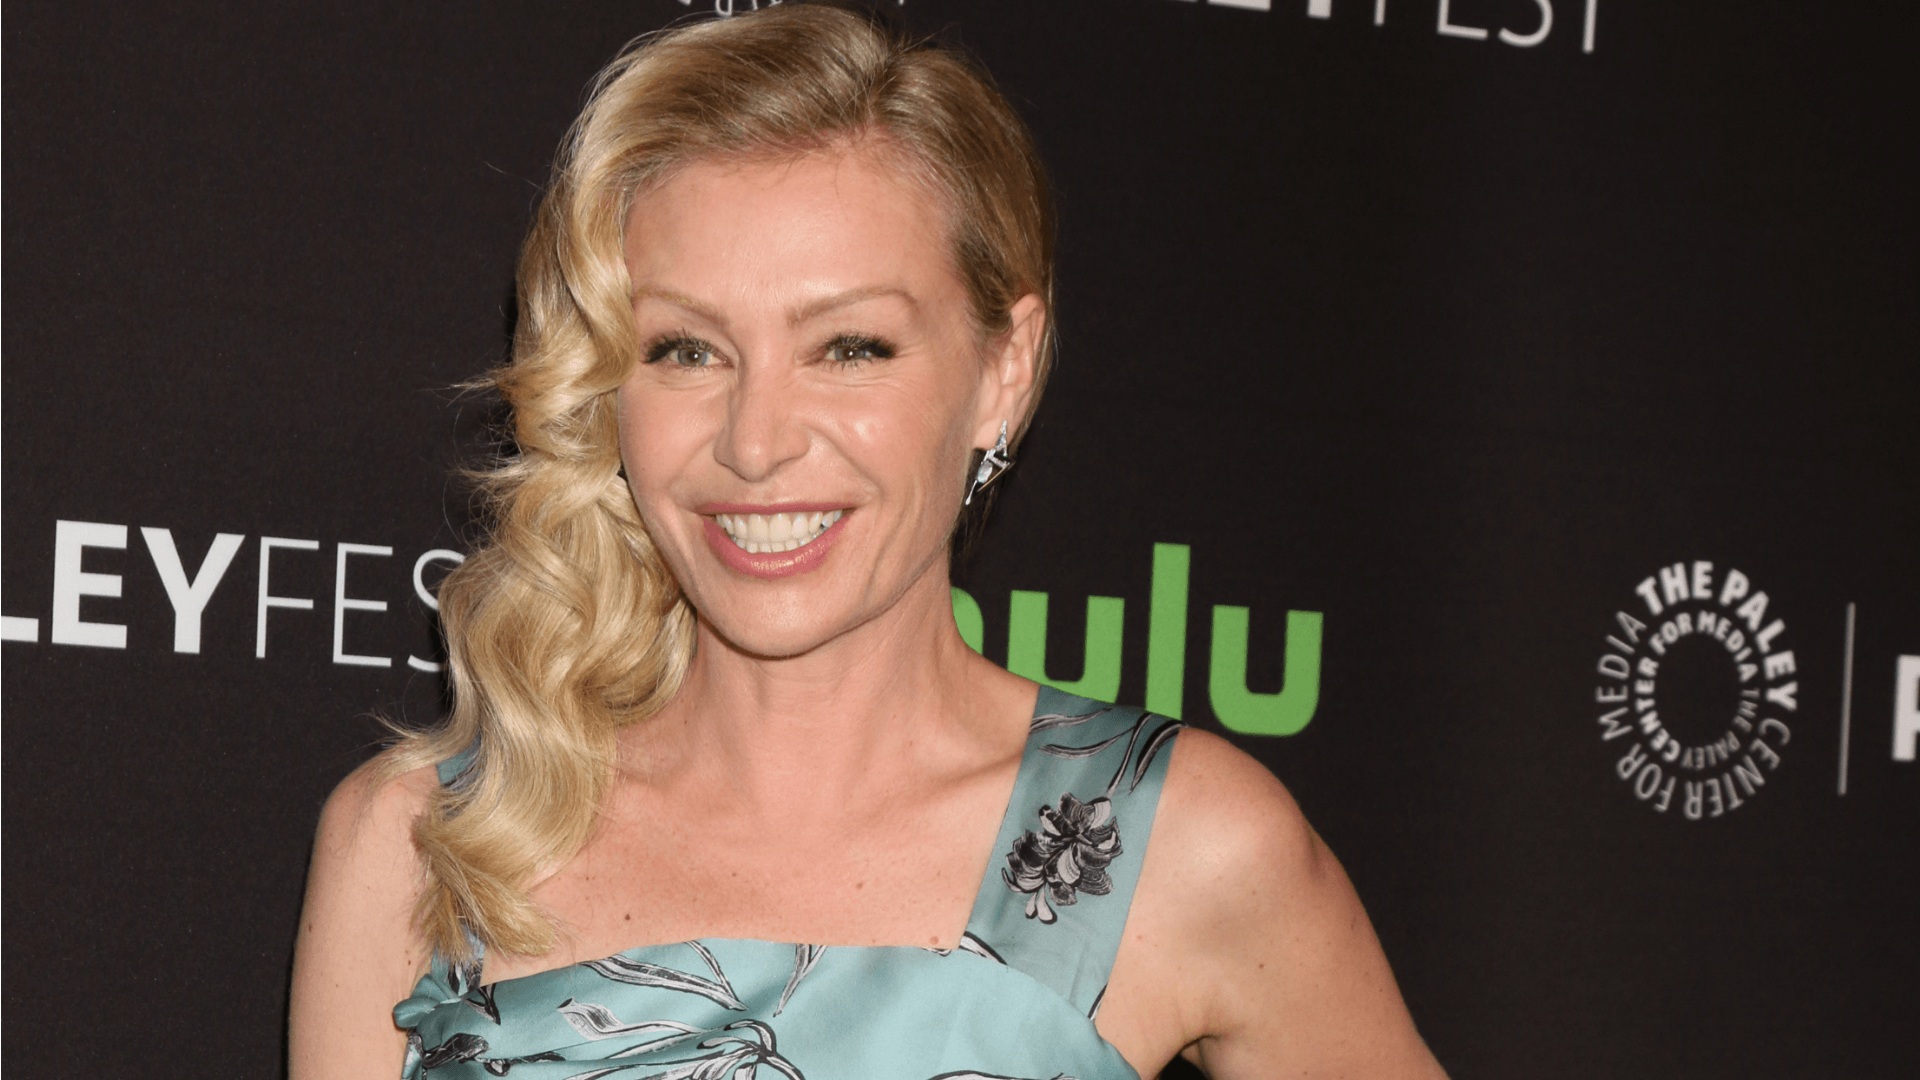 Portia de Rossi's thin appearance mocked with hateful comments